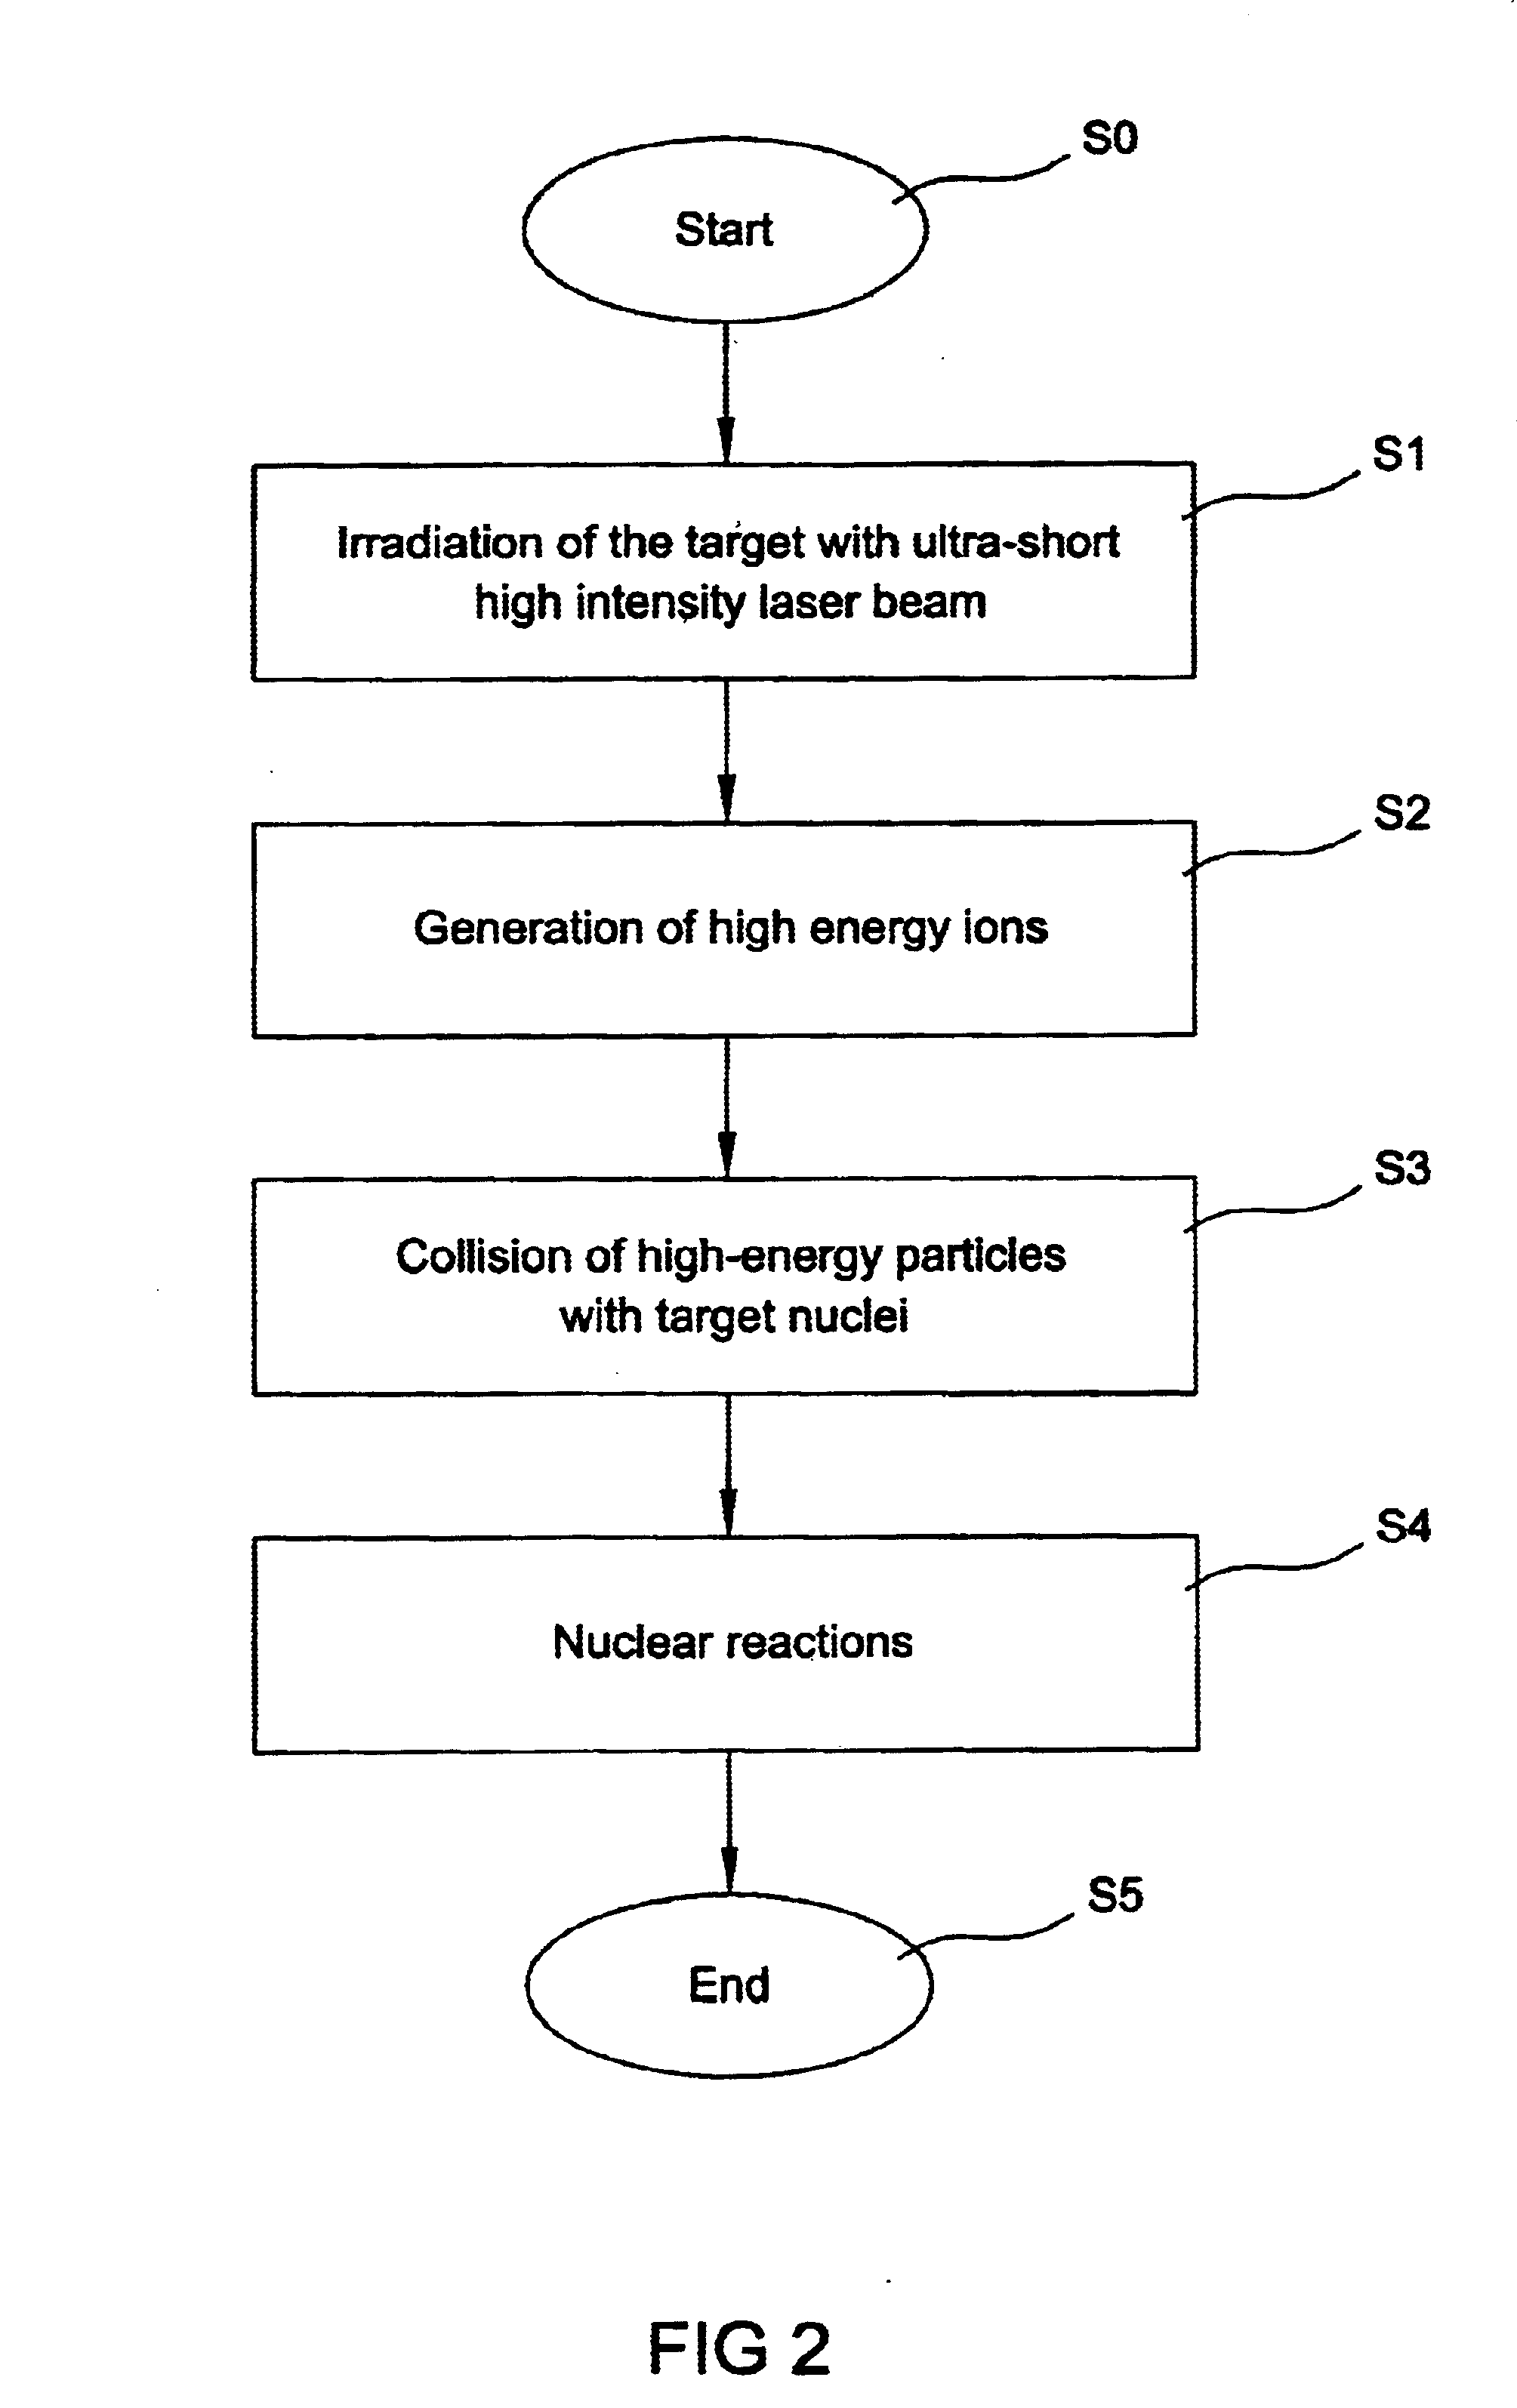 Method and apparatus for high-energy generation and for inducing nuclear reactions